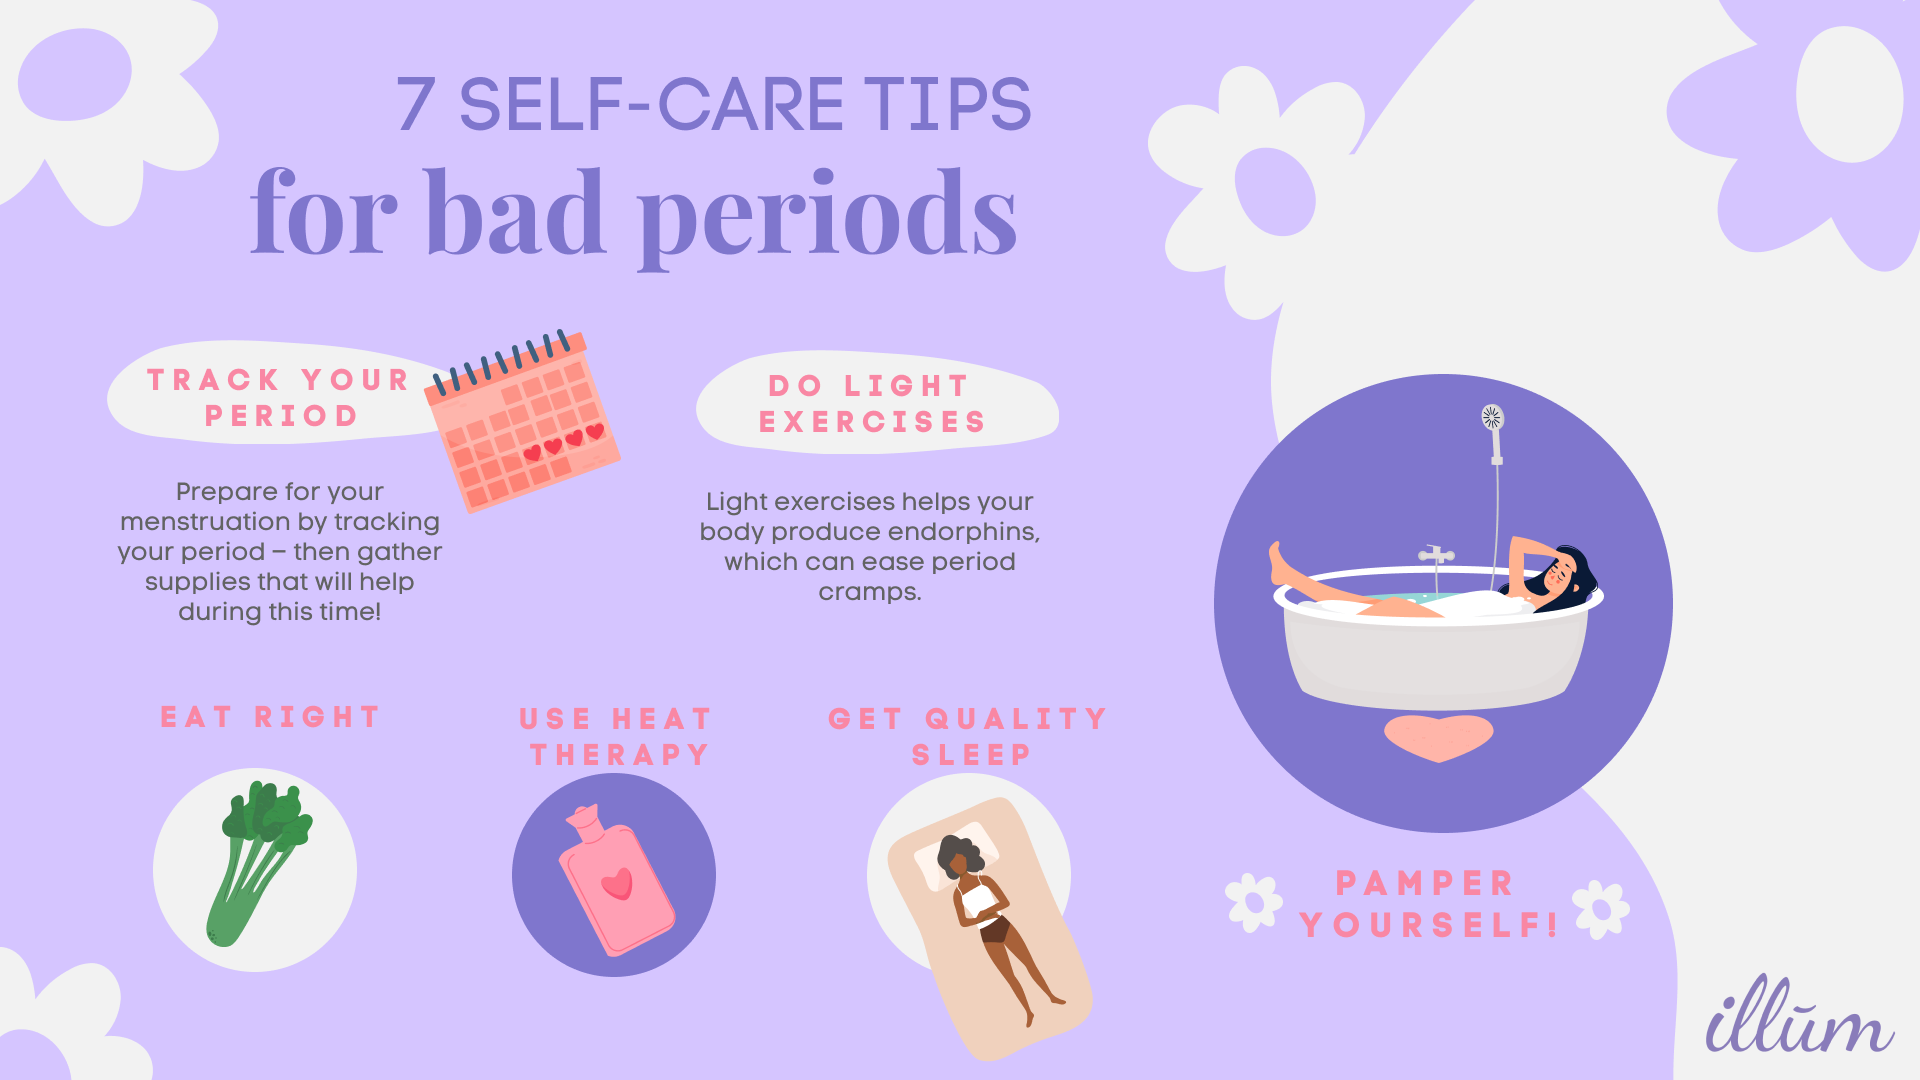 7 Self-Care Tips for Bad Periods- infographic